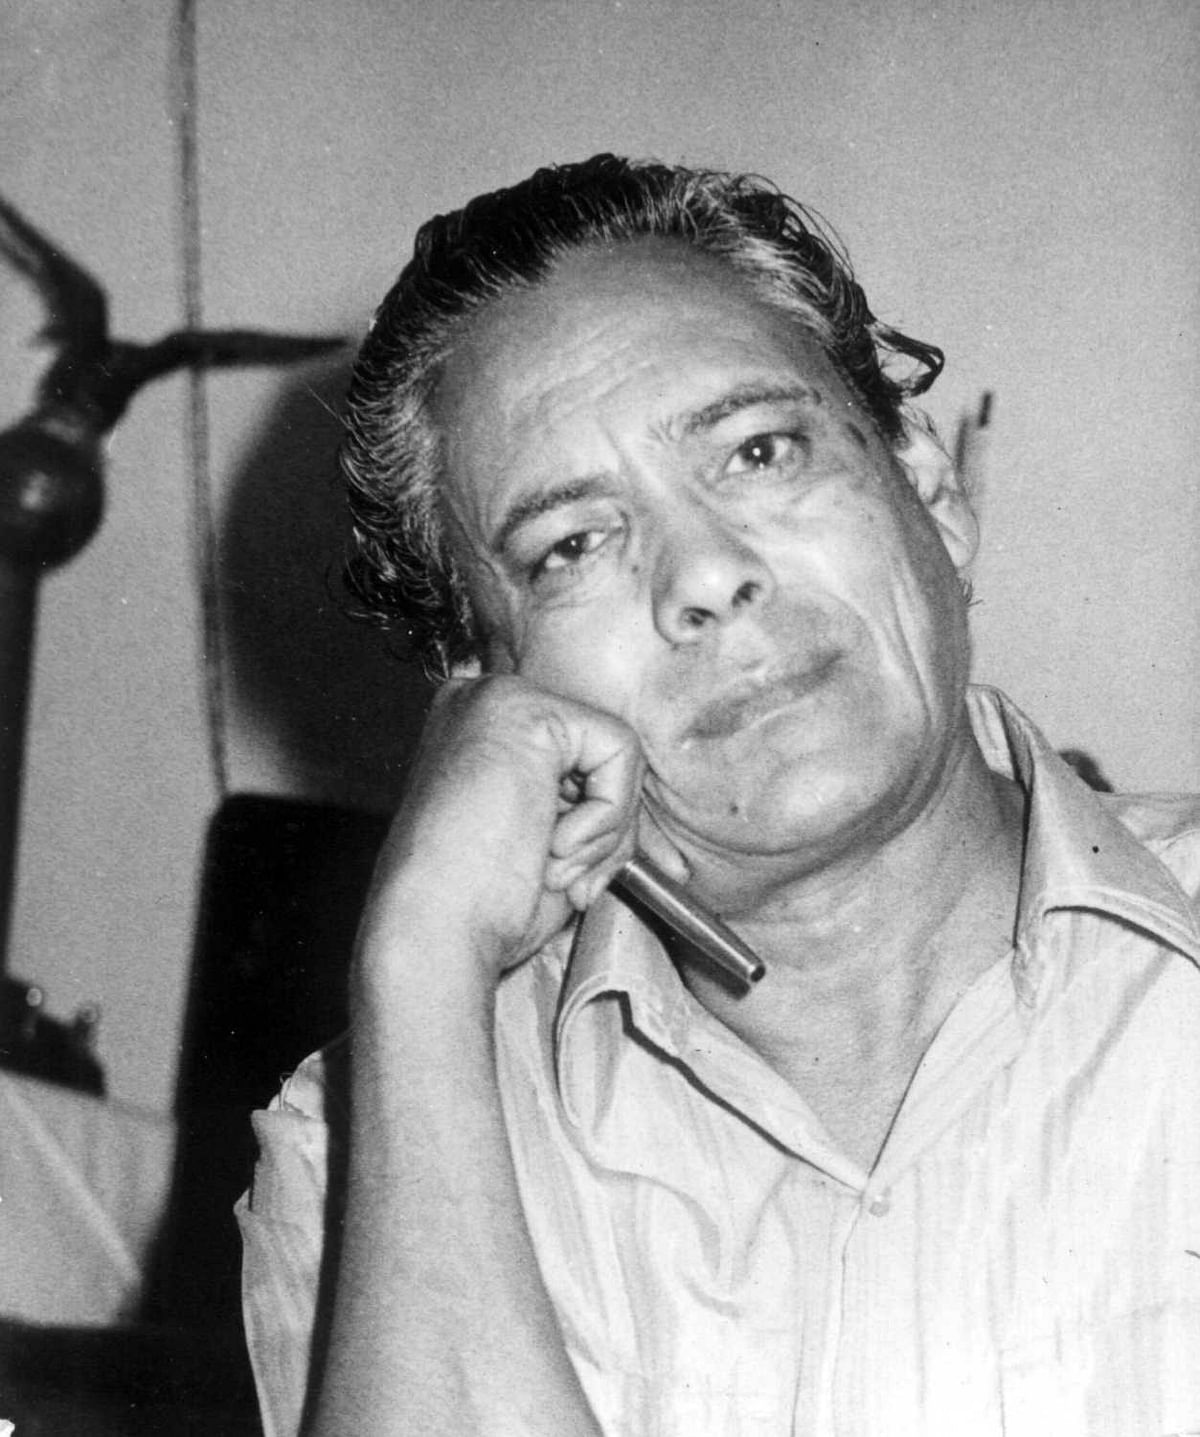 How a bus conductor became a famous lyricist